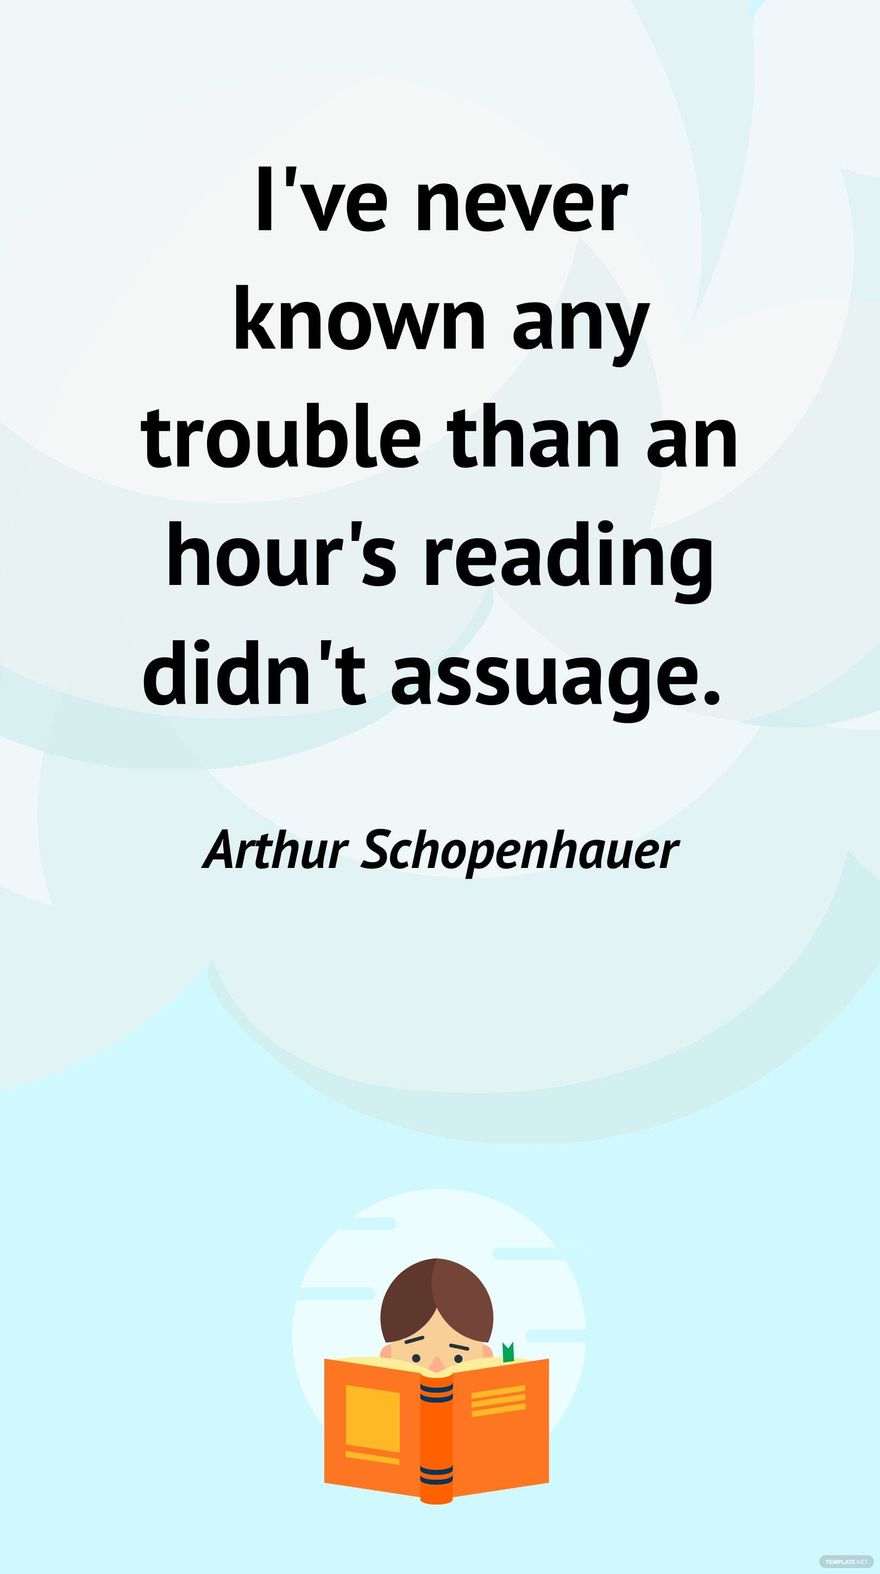 Free Arthur Schopenhauer - I've never known any trouble than an hour's reading didn't assuage. in JPG